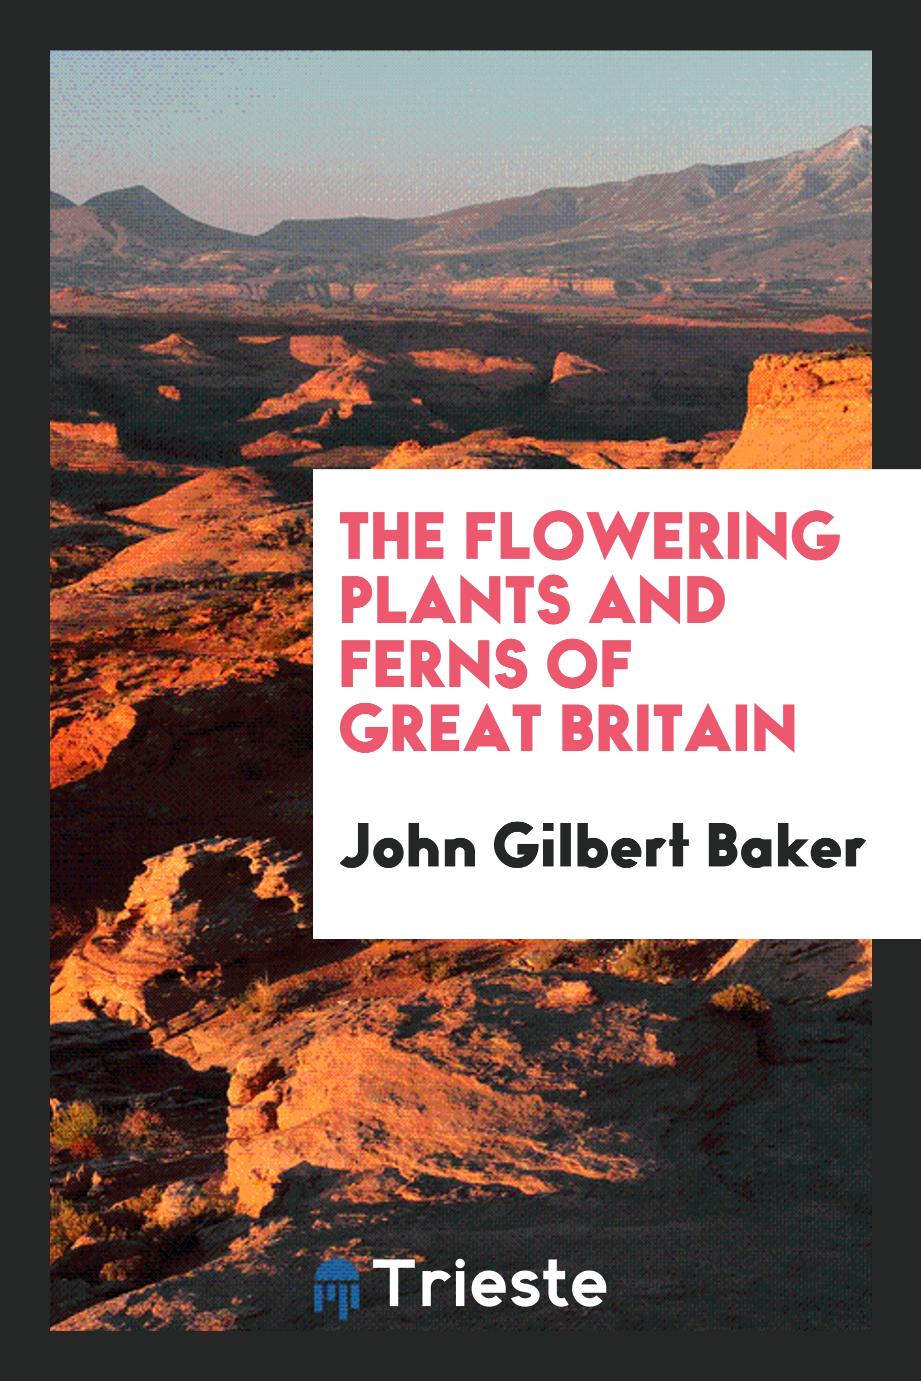 The flowering plants and ferns of Great Britain